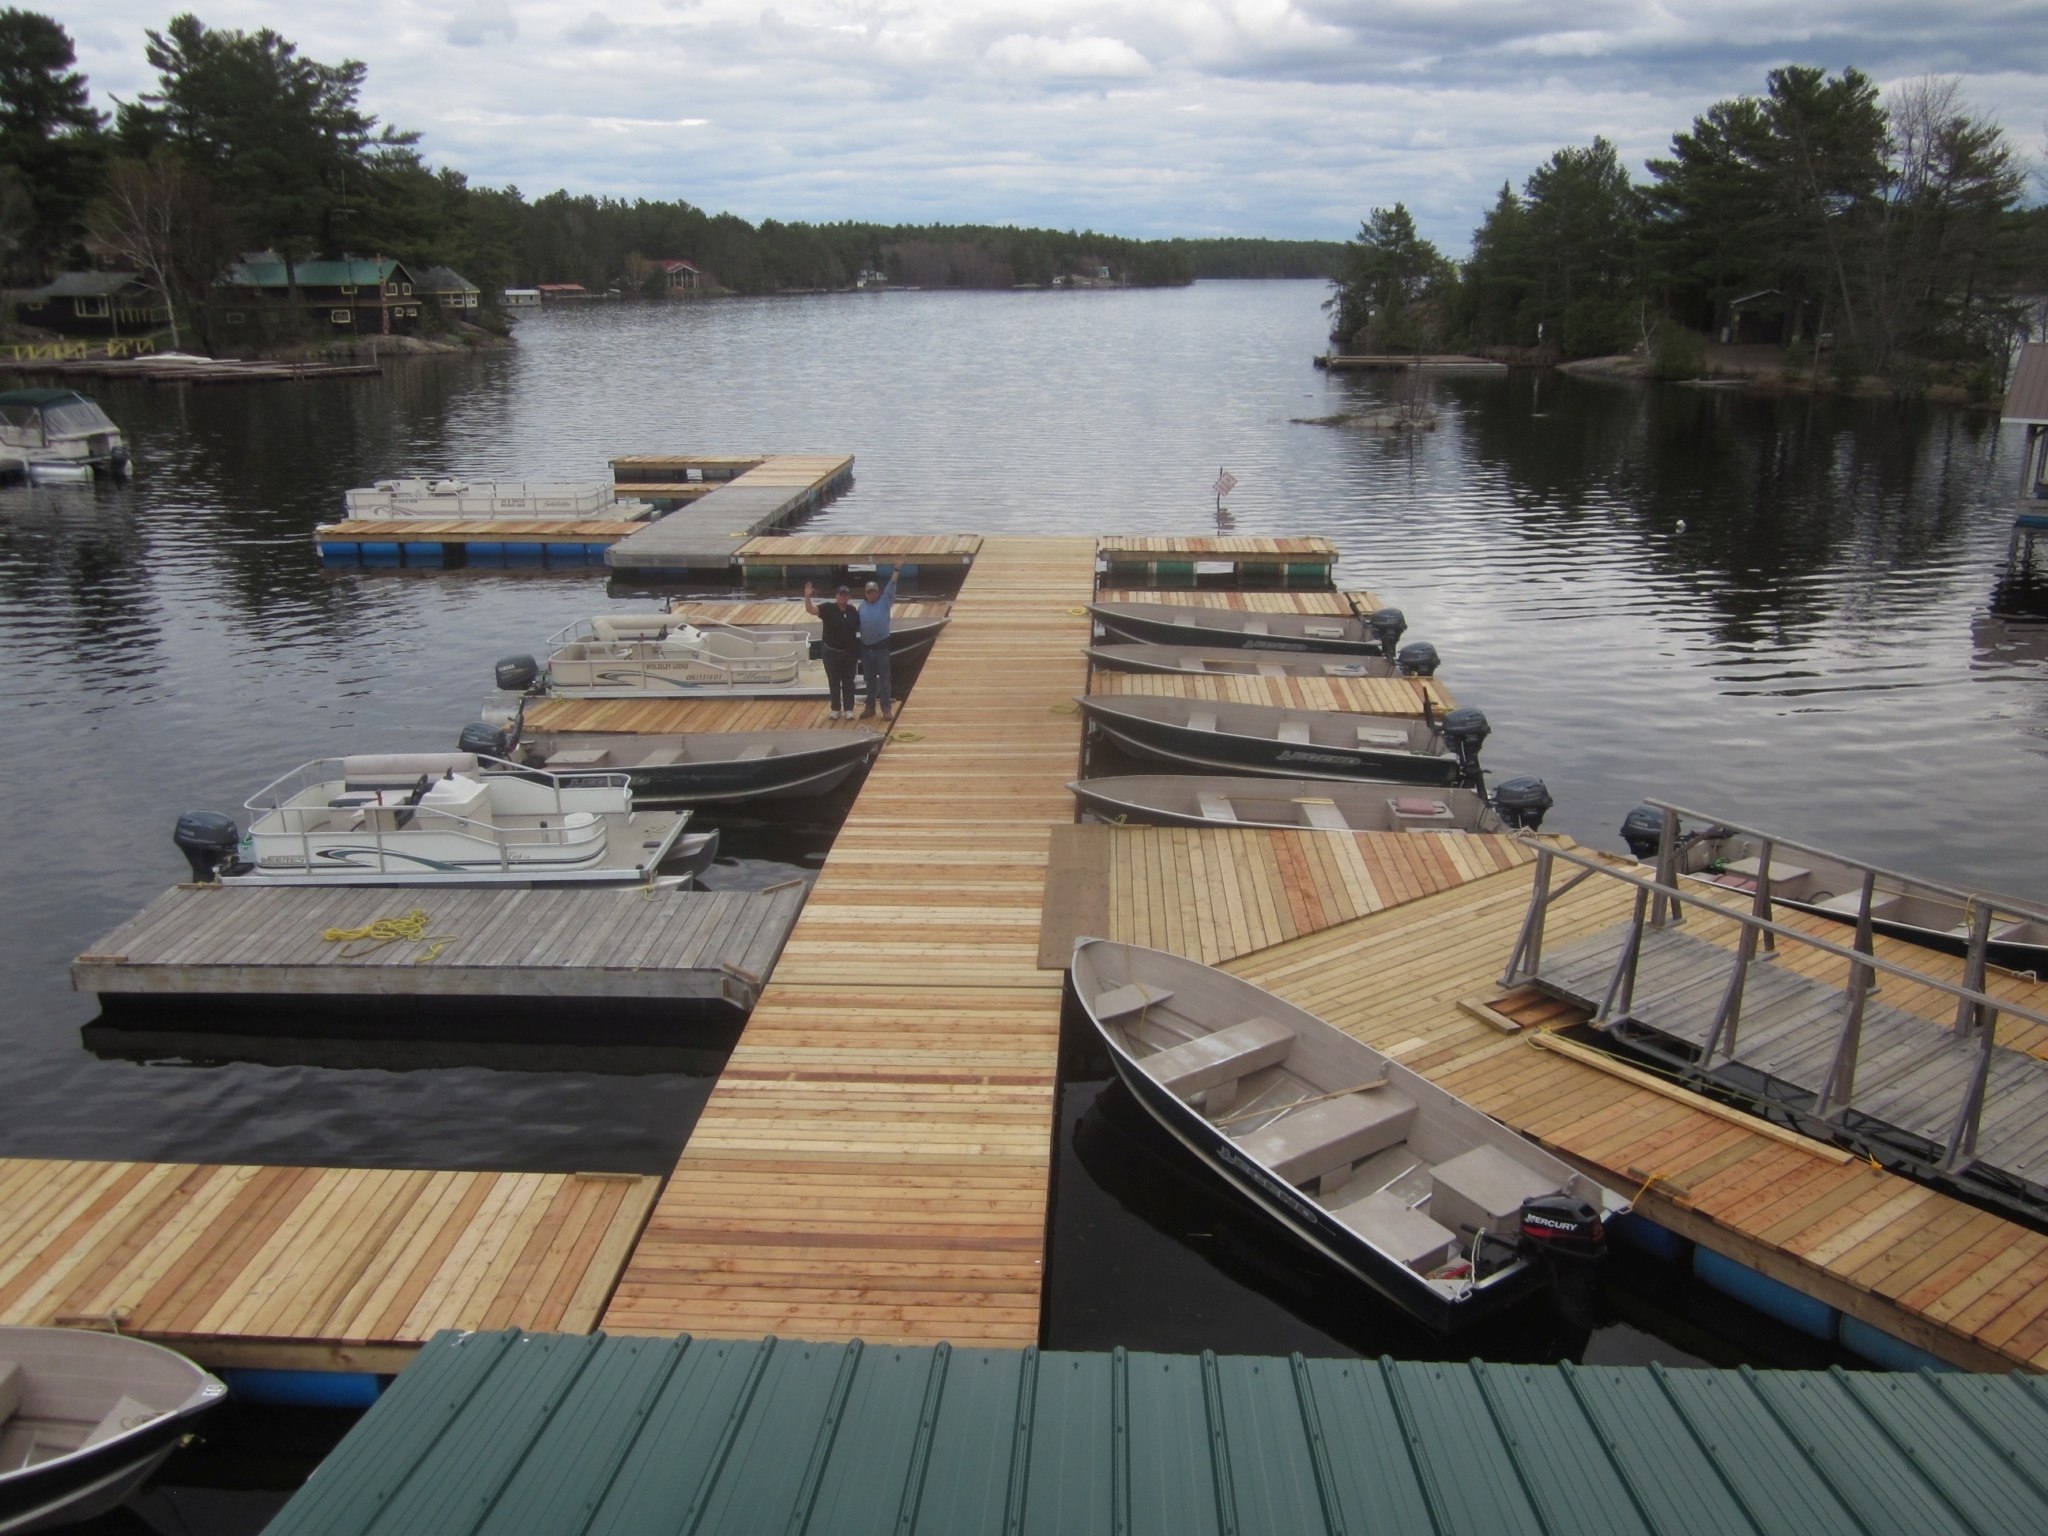 Boats on the dock.